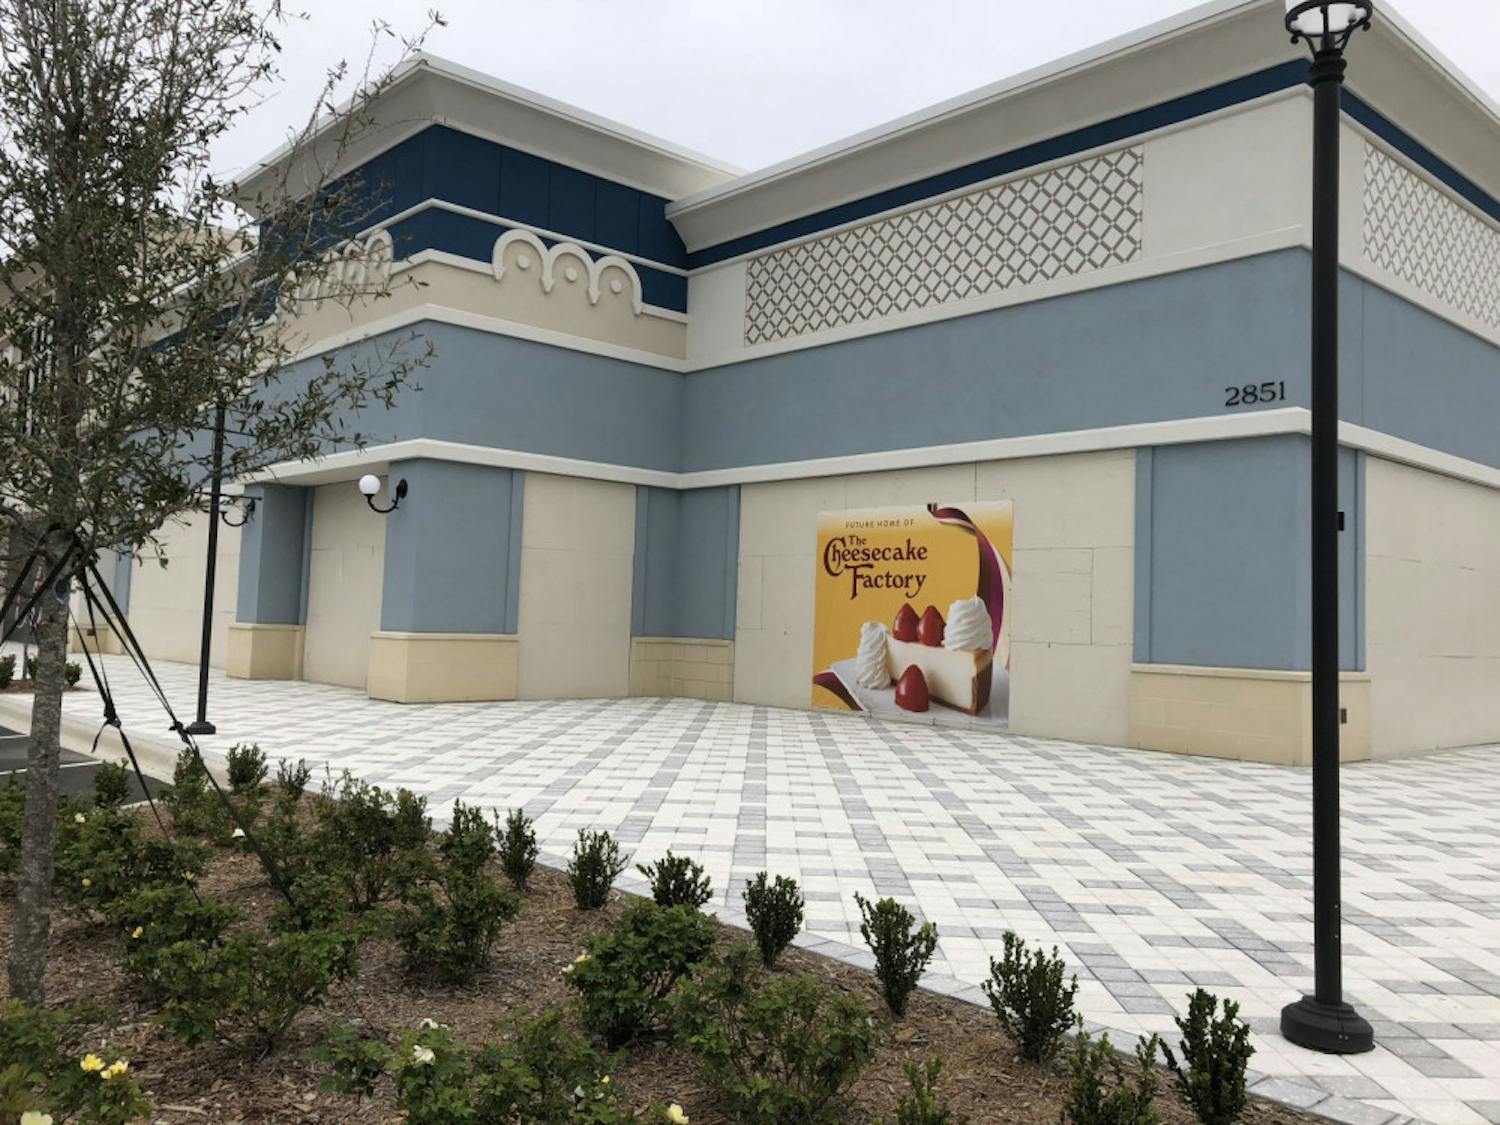 The Cheesecake Factory will be opening in the Butler Town Center at&nbsp;2851 SW 35th Place next to Whole Foods and behind Grub Burger Bar in the fall.
&nbsp;